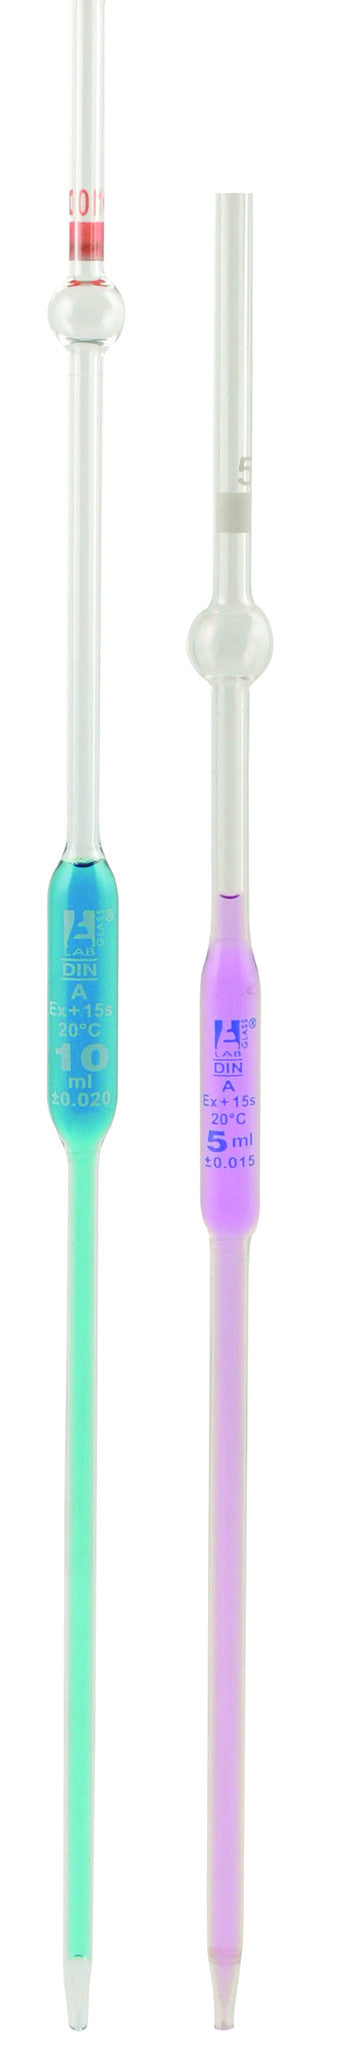 Pipettes Class - B with Safety Bulb, 20 ml, White Graduation